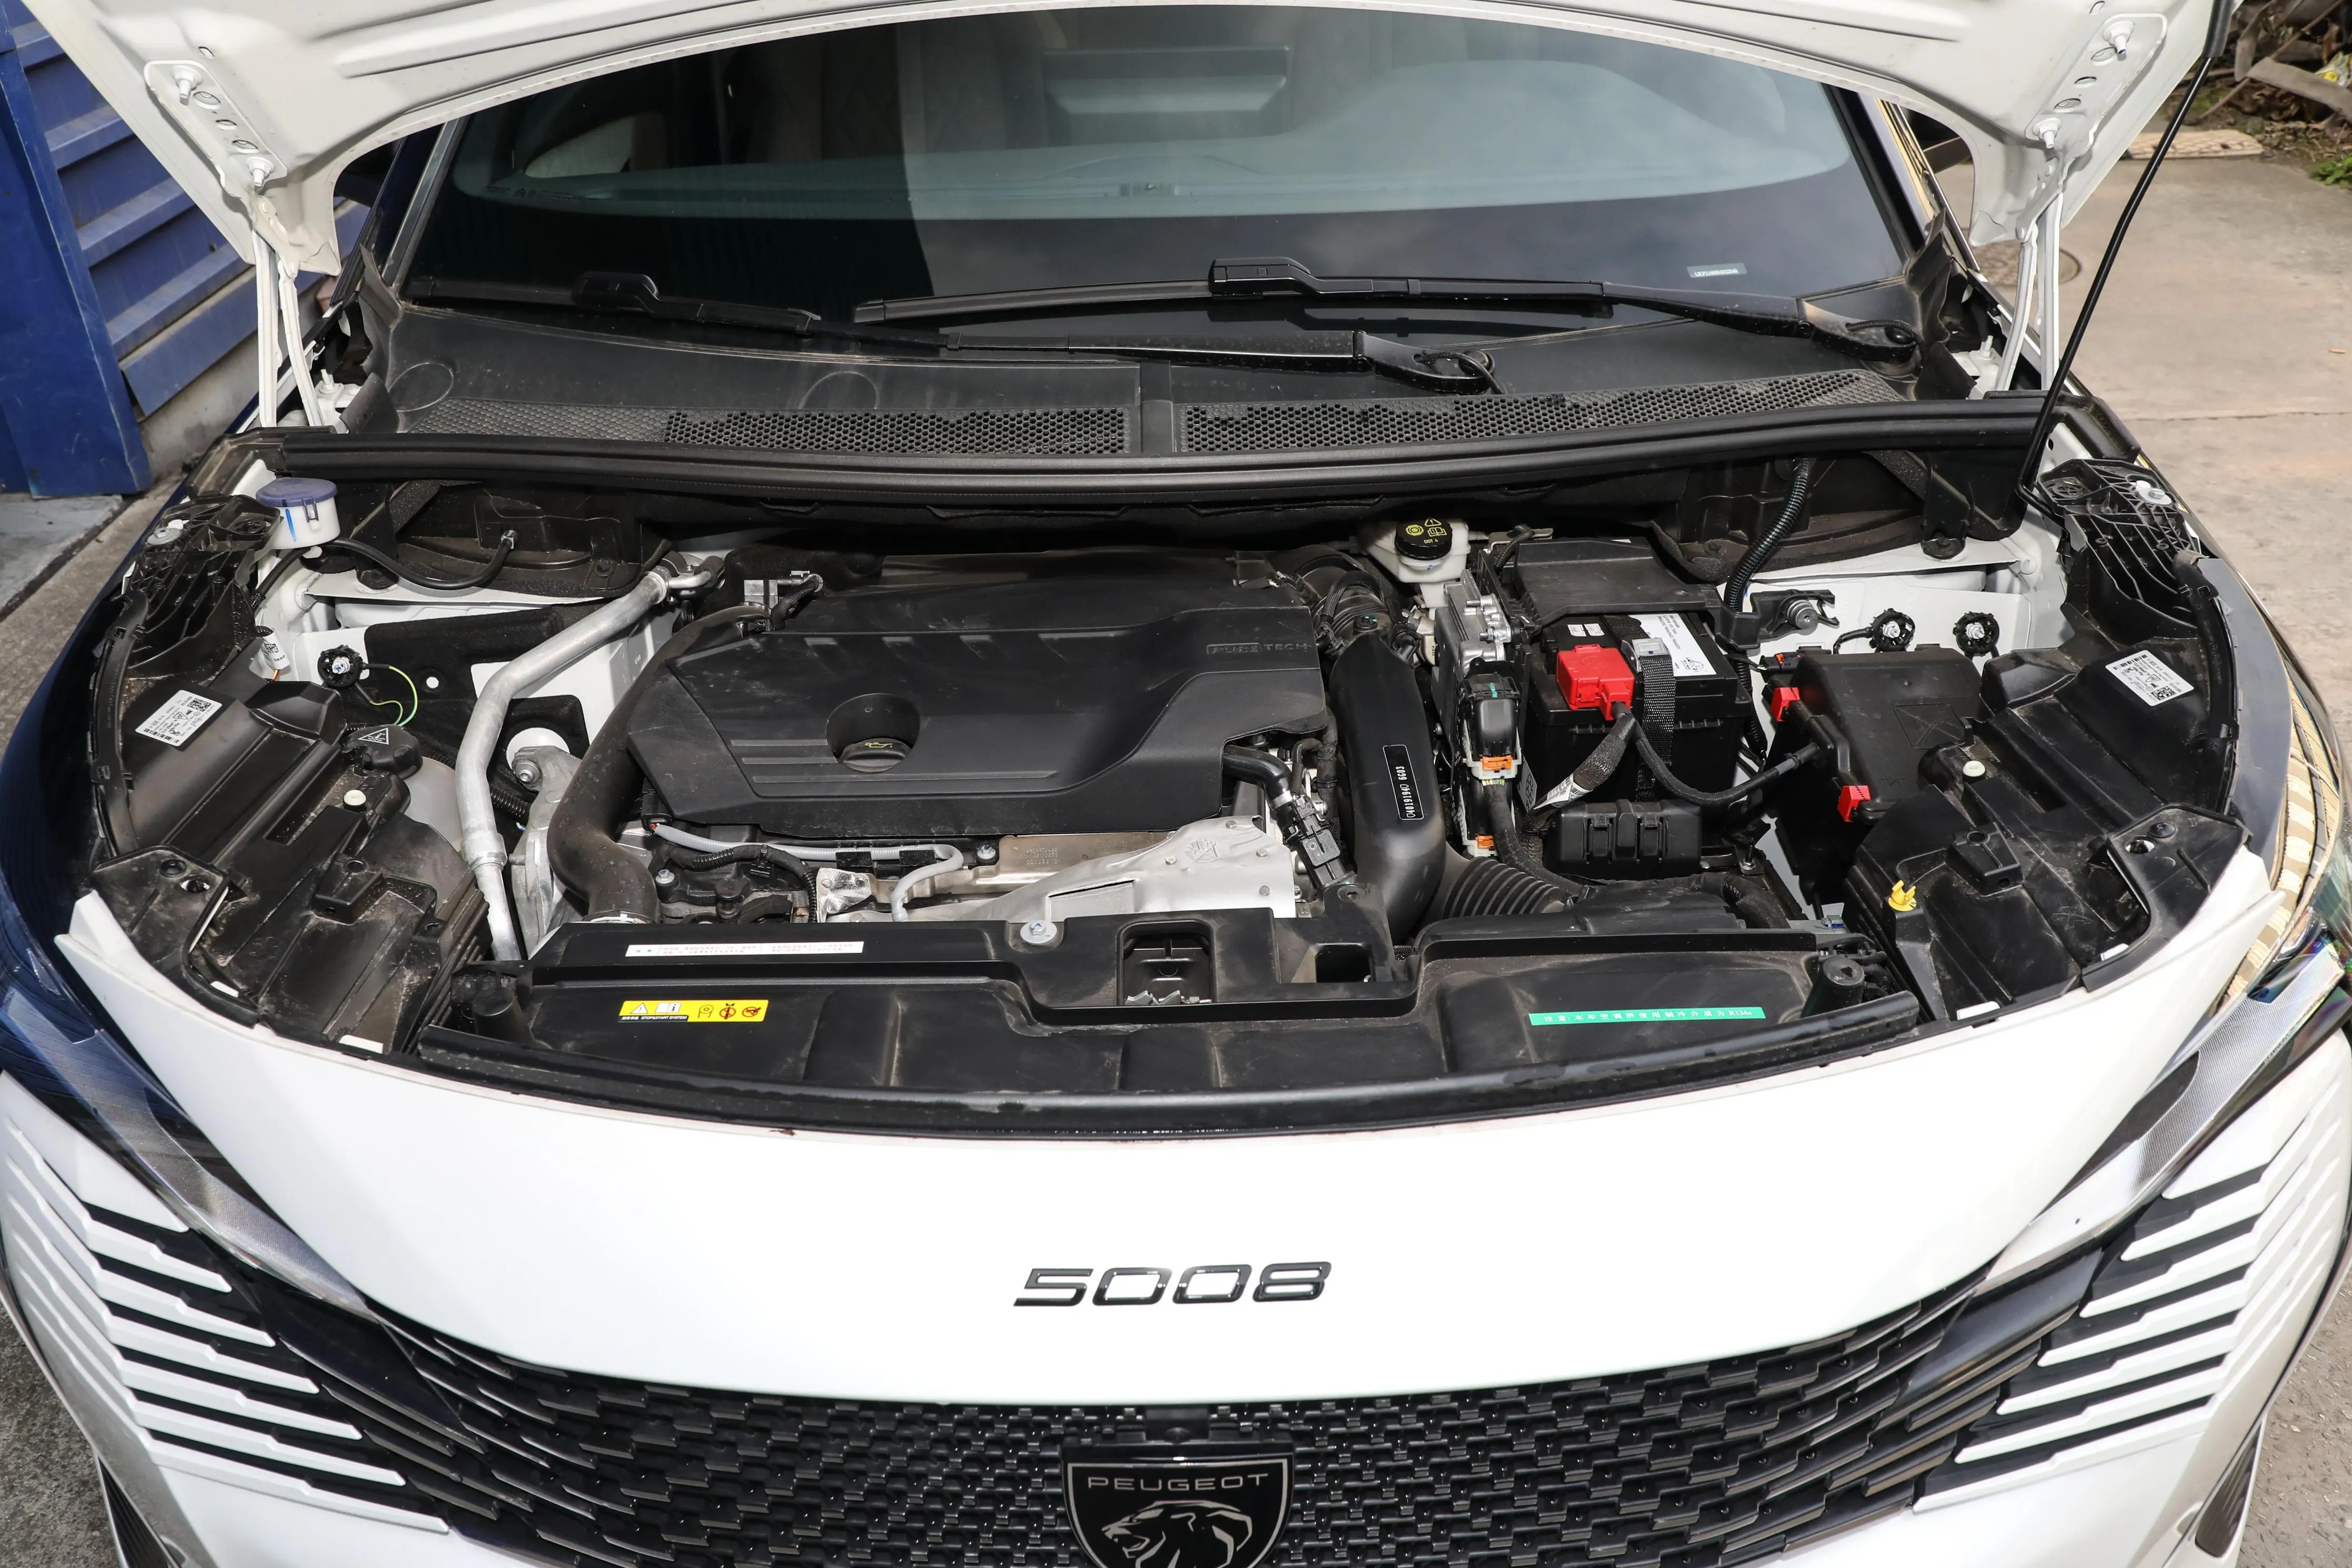 New Dongfeng Peugeot 5008 model with updated configuration priced at $32K